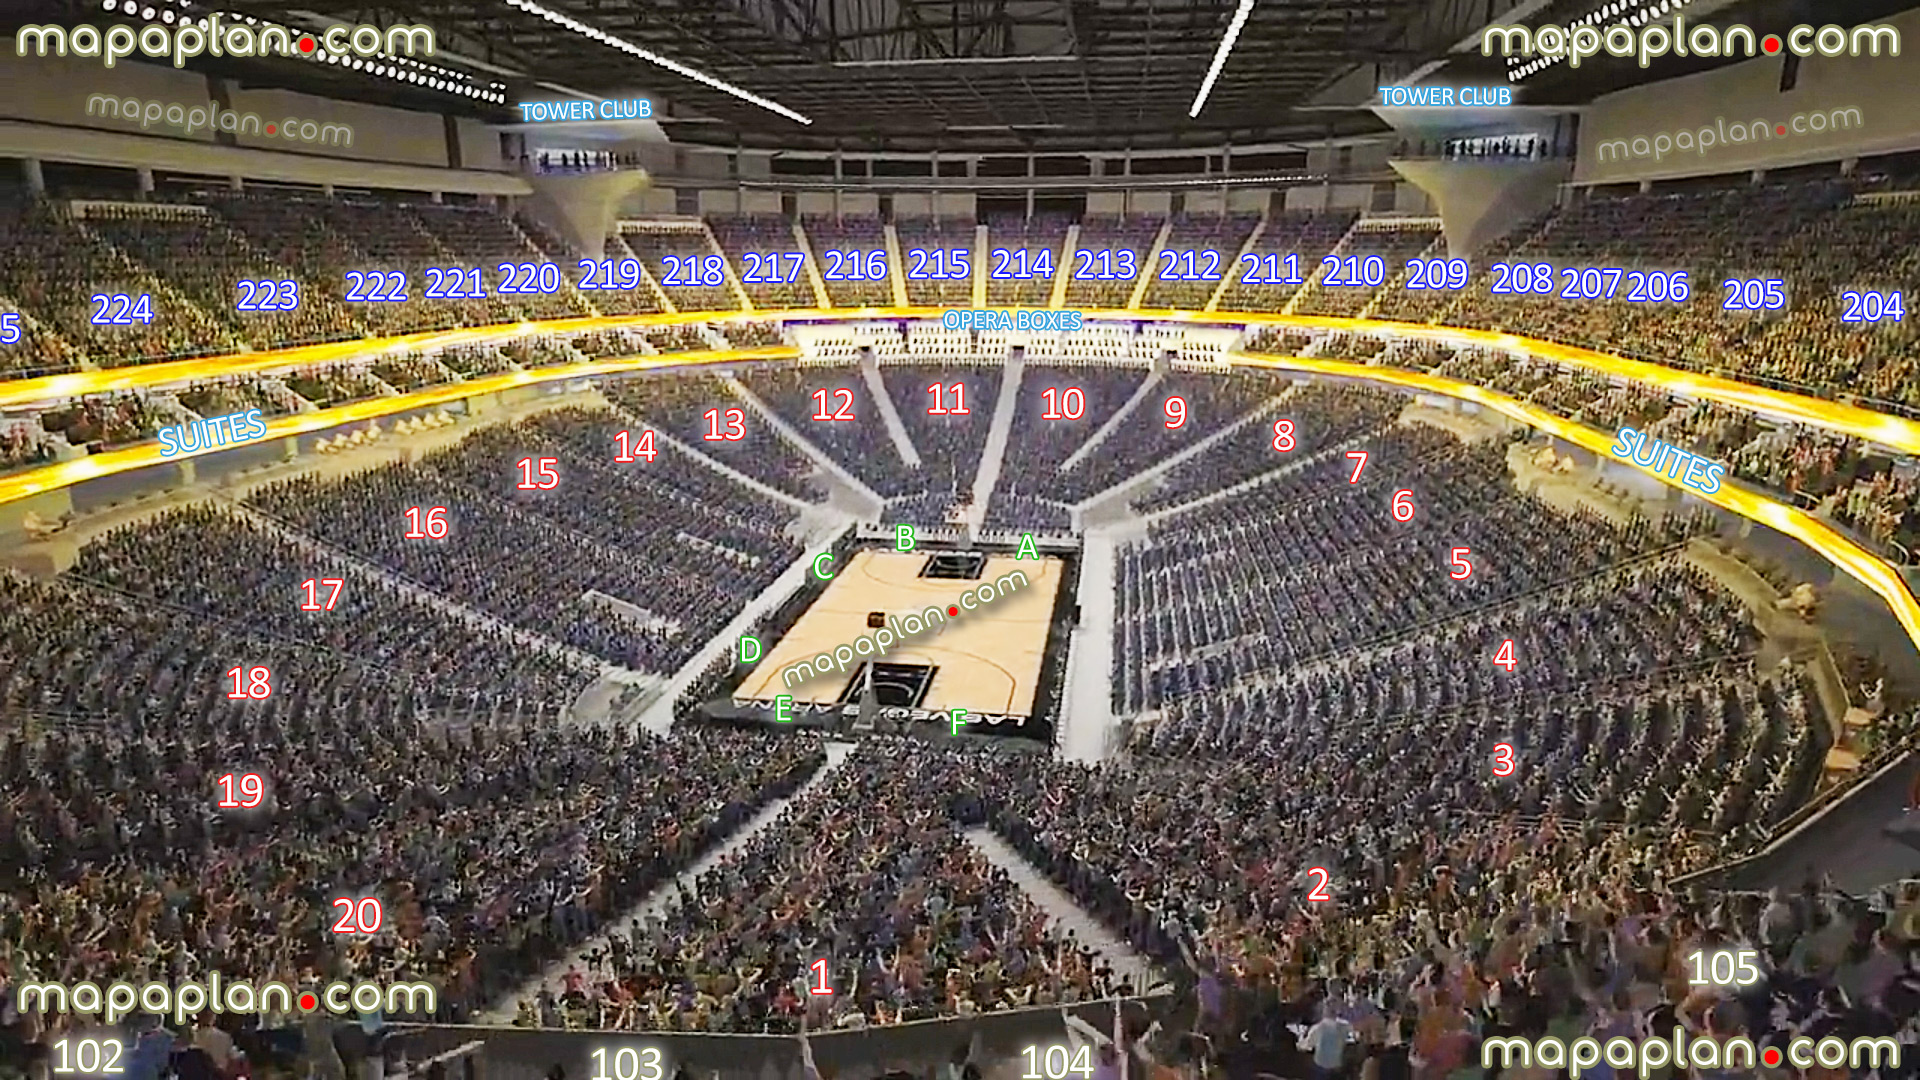 view section 103 row m seat 1 basketball arena stadium panorama courtside vip seats opera boxes sky tower clubs best sections guide 1 2 3 4 5 6 7 8 9 10 11 12 13 14 15 16 17 18 19 20 Las Vegas New T-Mobile Arena MGM-AEG seating chart